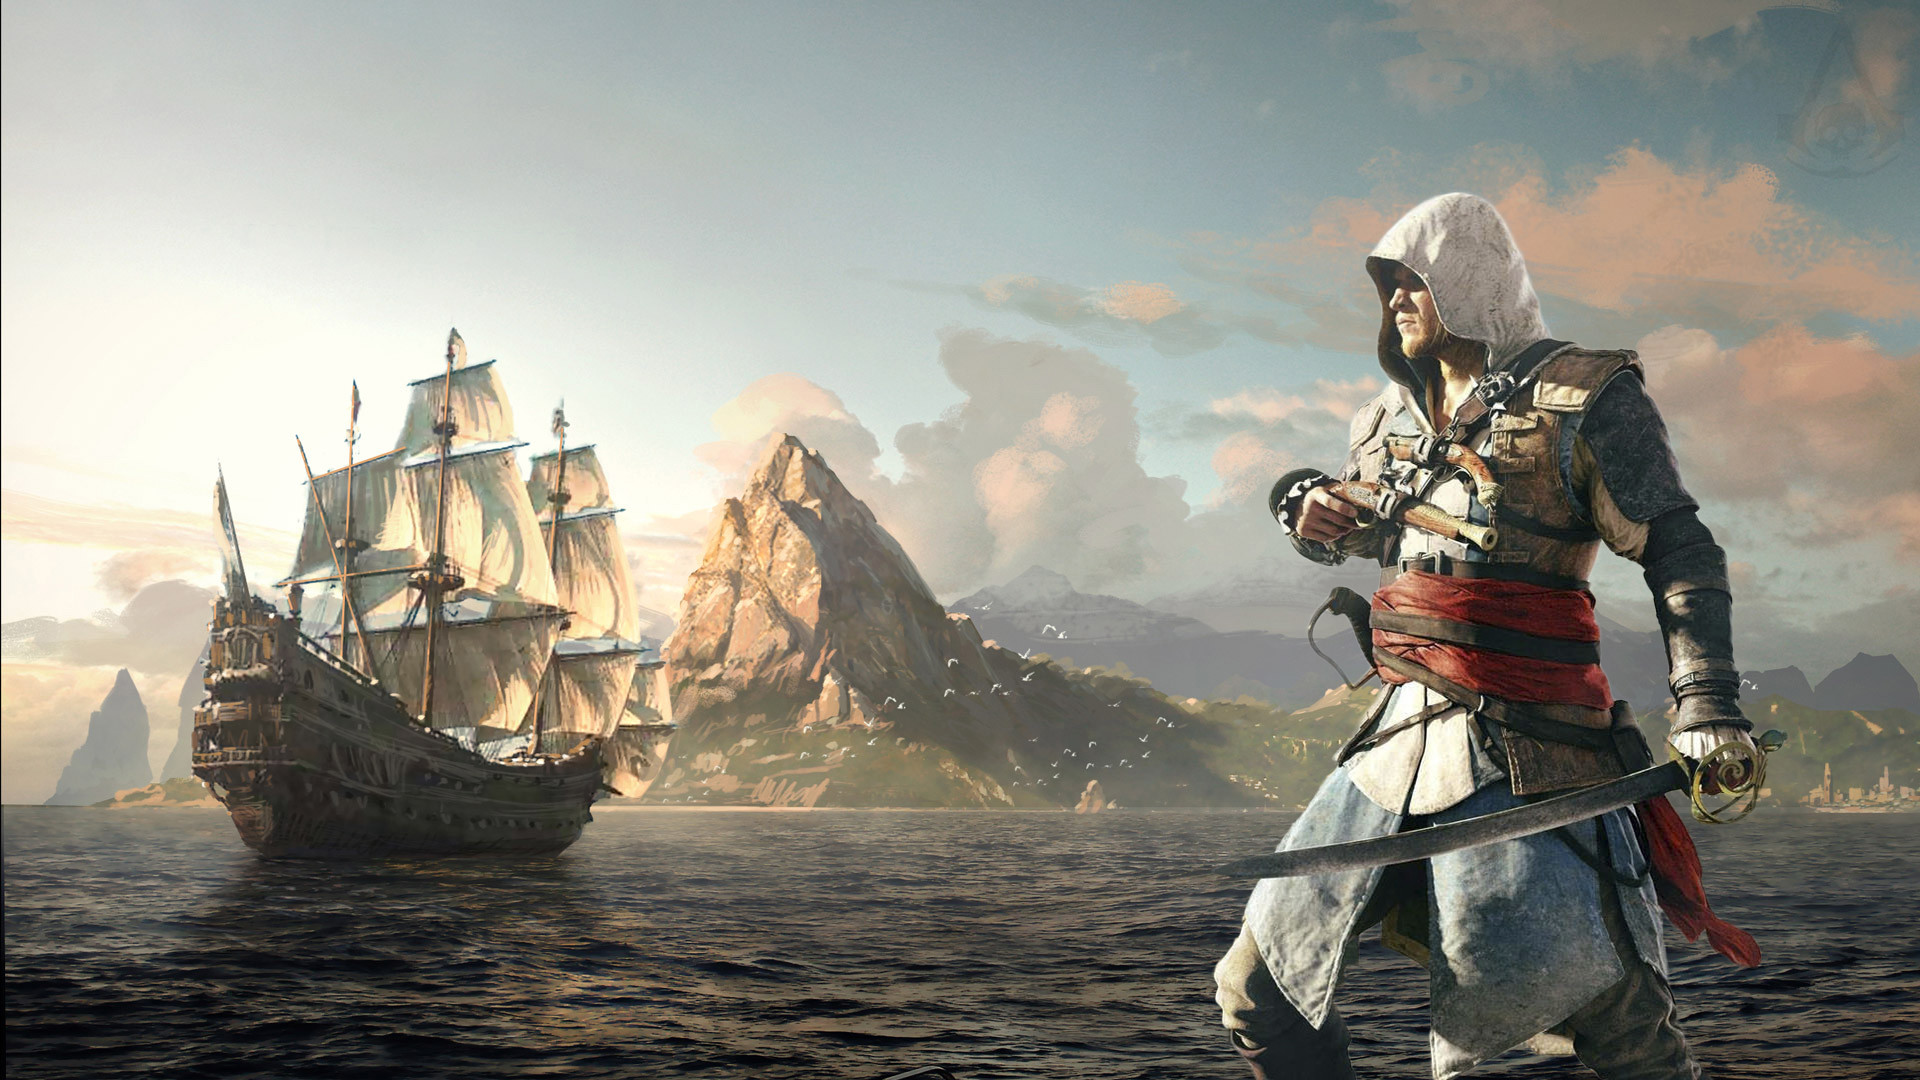 1920x1080 ... Assassin's Creed IV Wallpaper 2 by miqqa1234